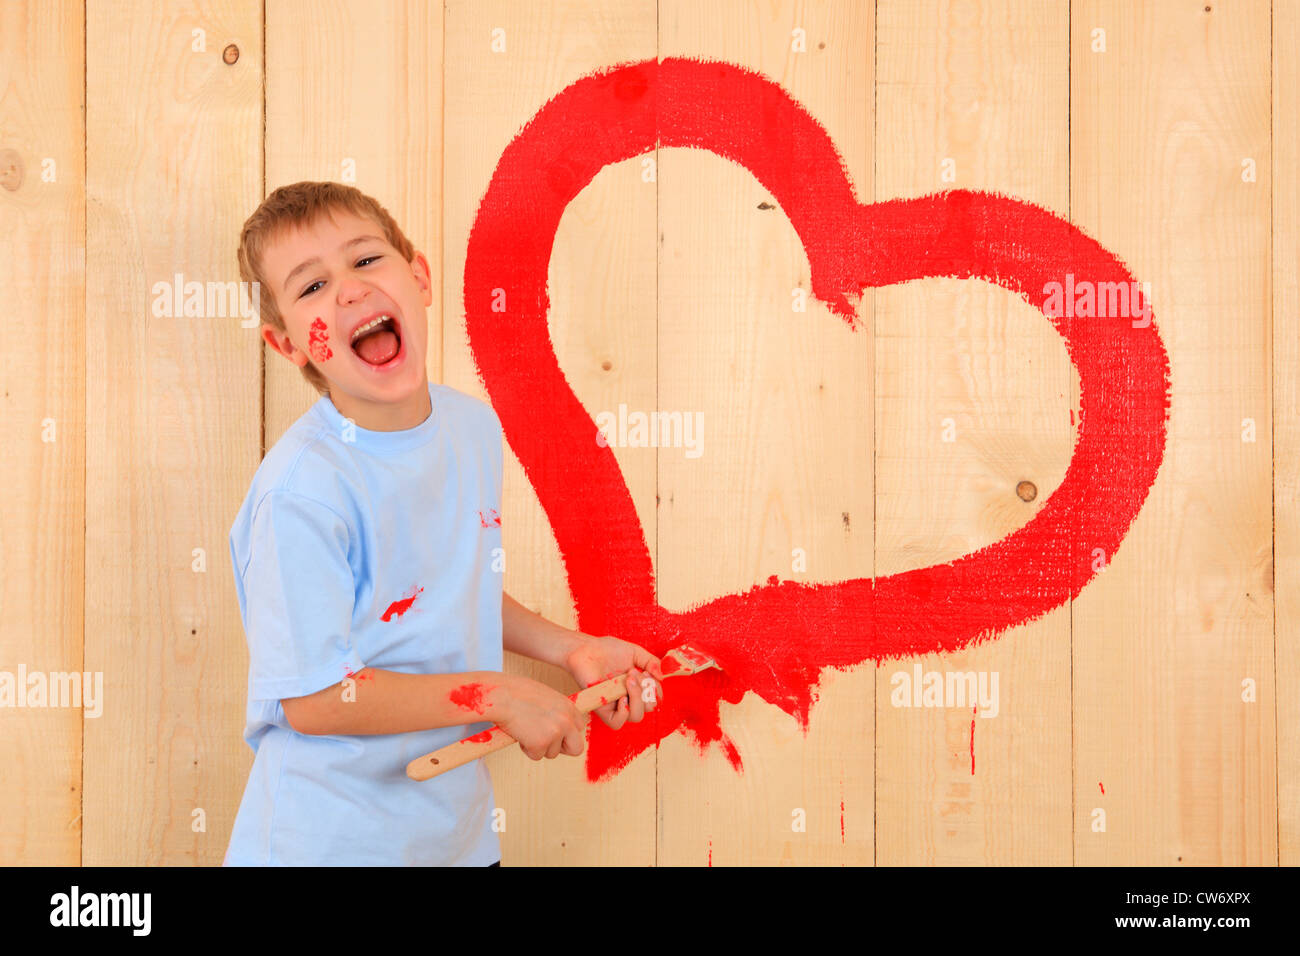 laughing boy painting a heart onto a wooden wall with red paint Stock Photo